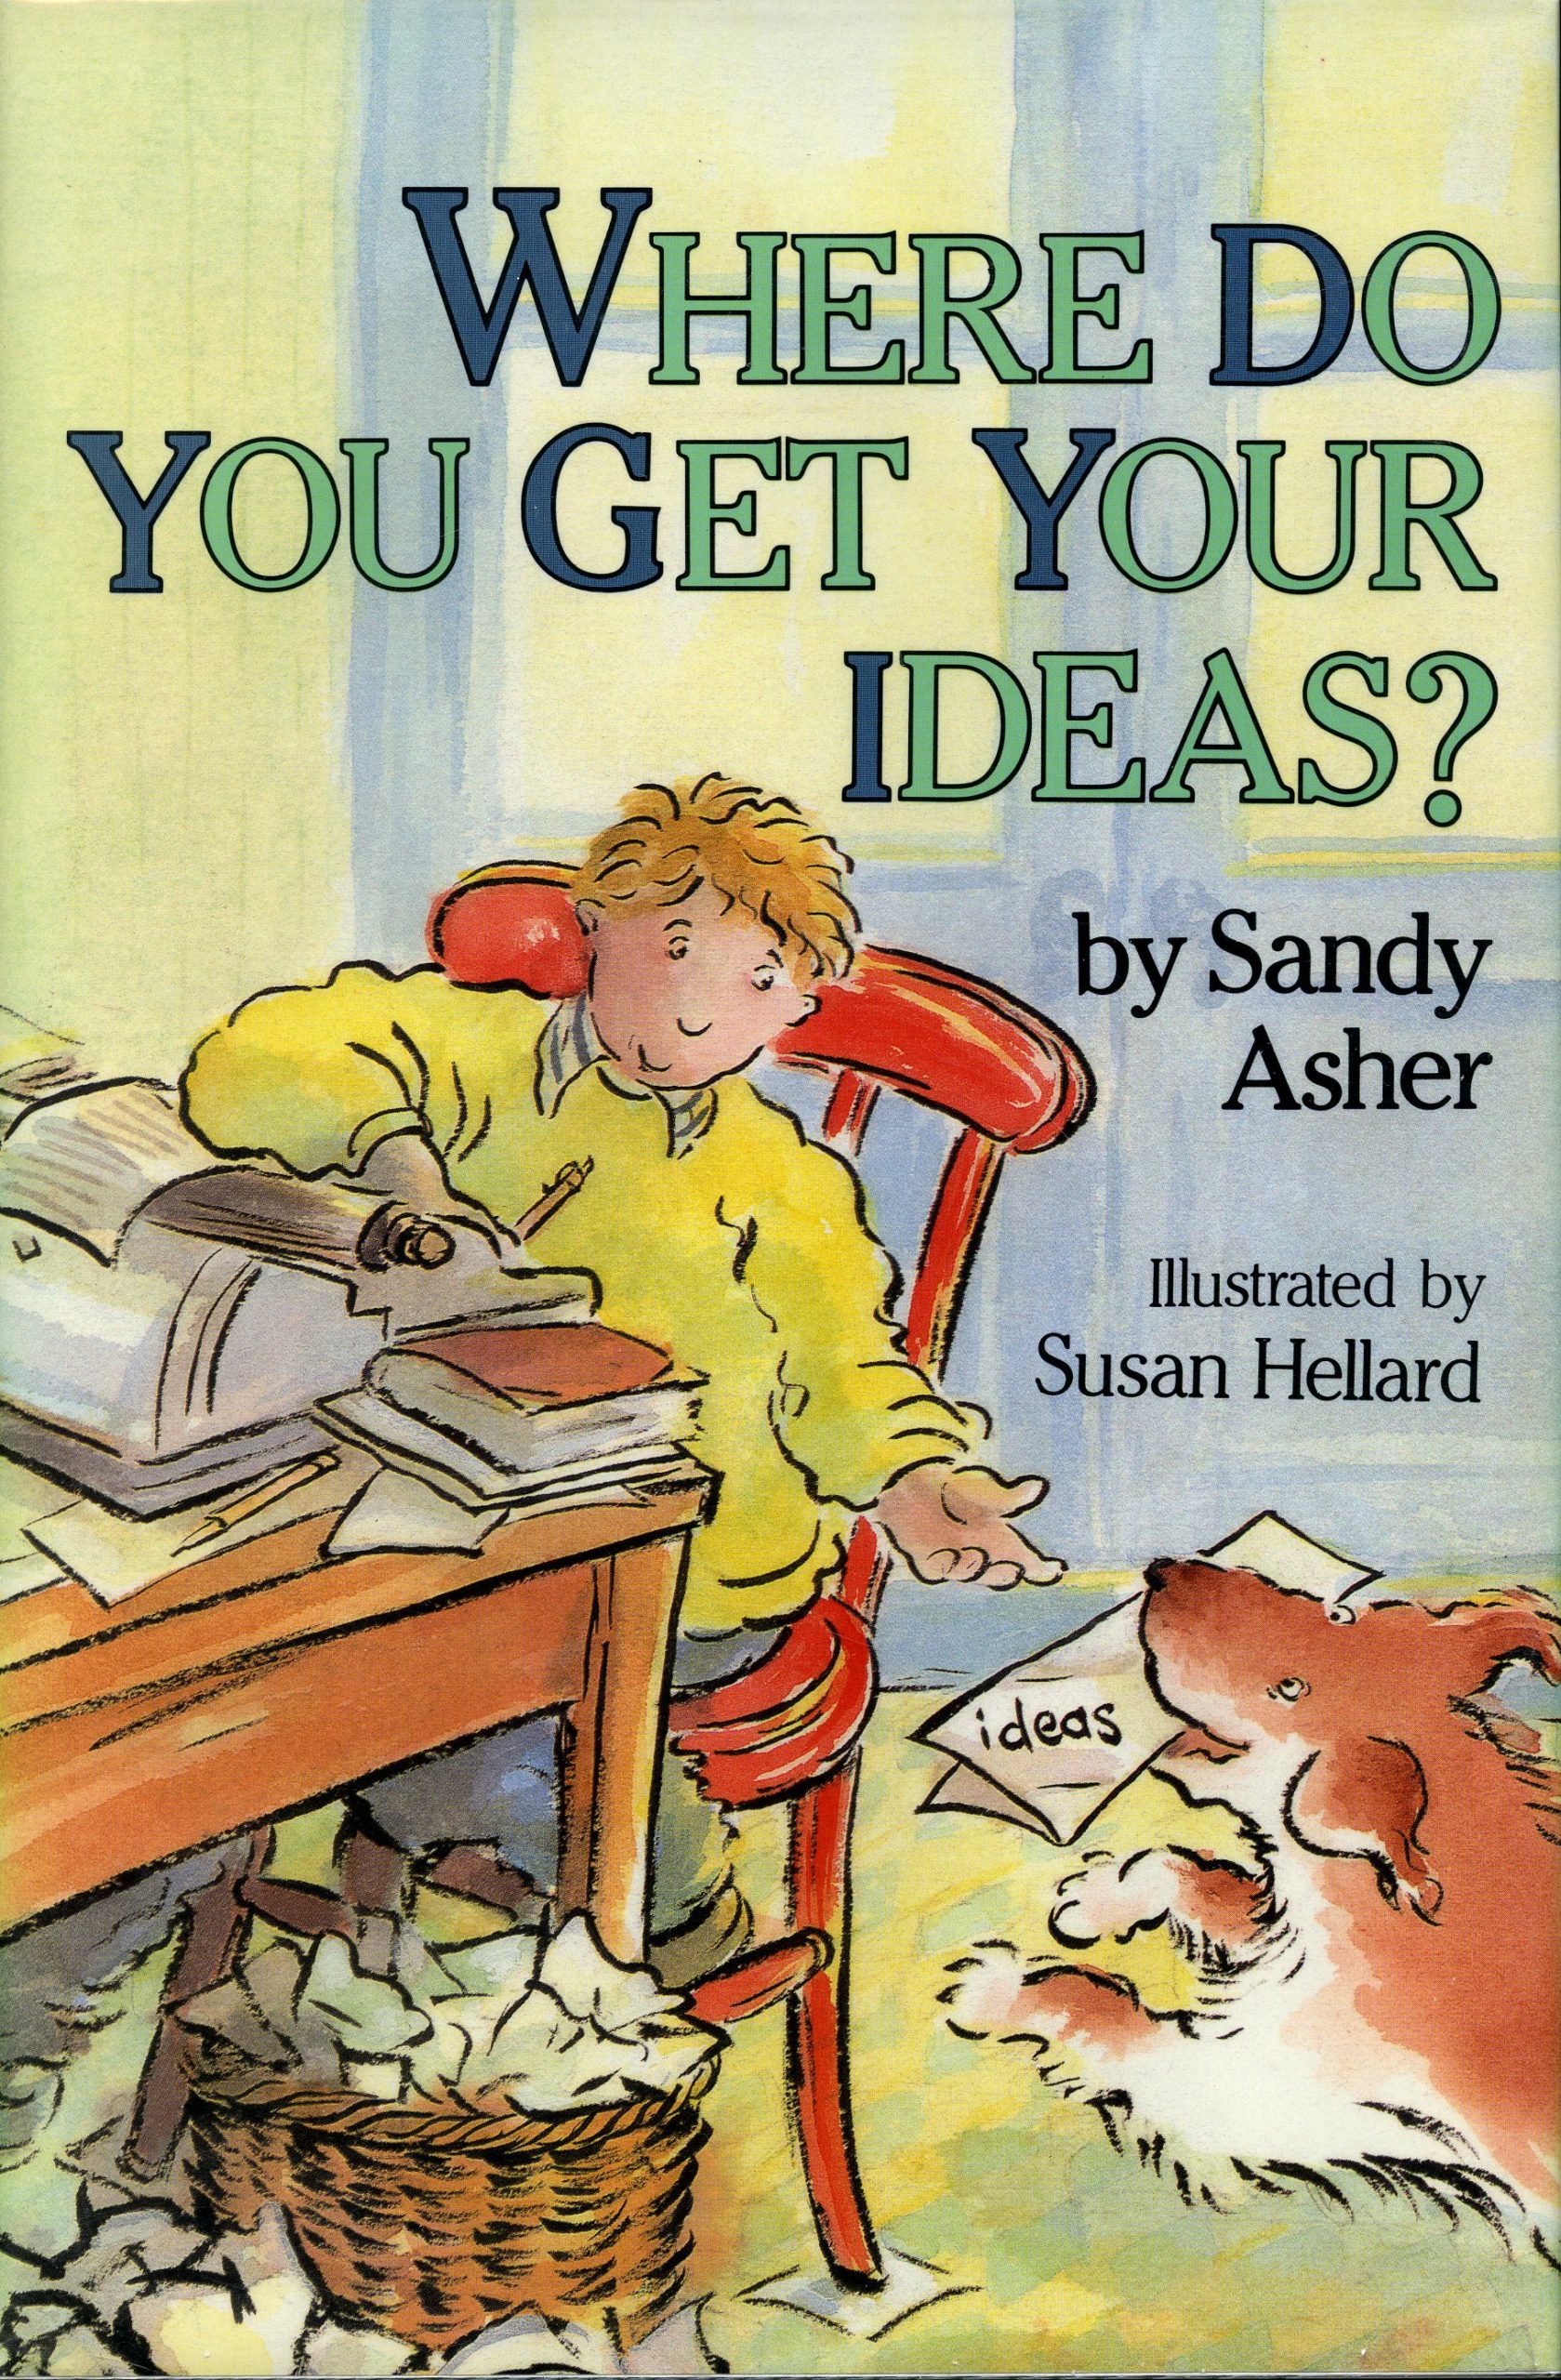 Where Do You Get Your Ideas? by Sandy Asher